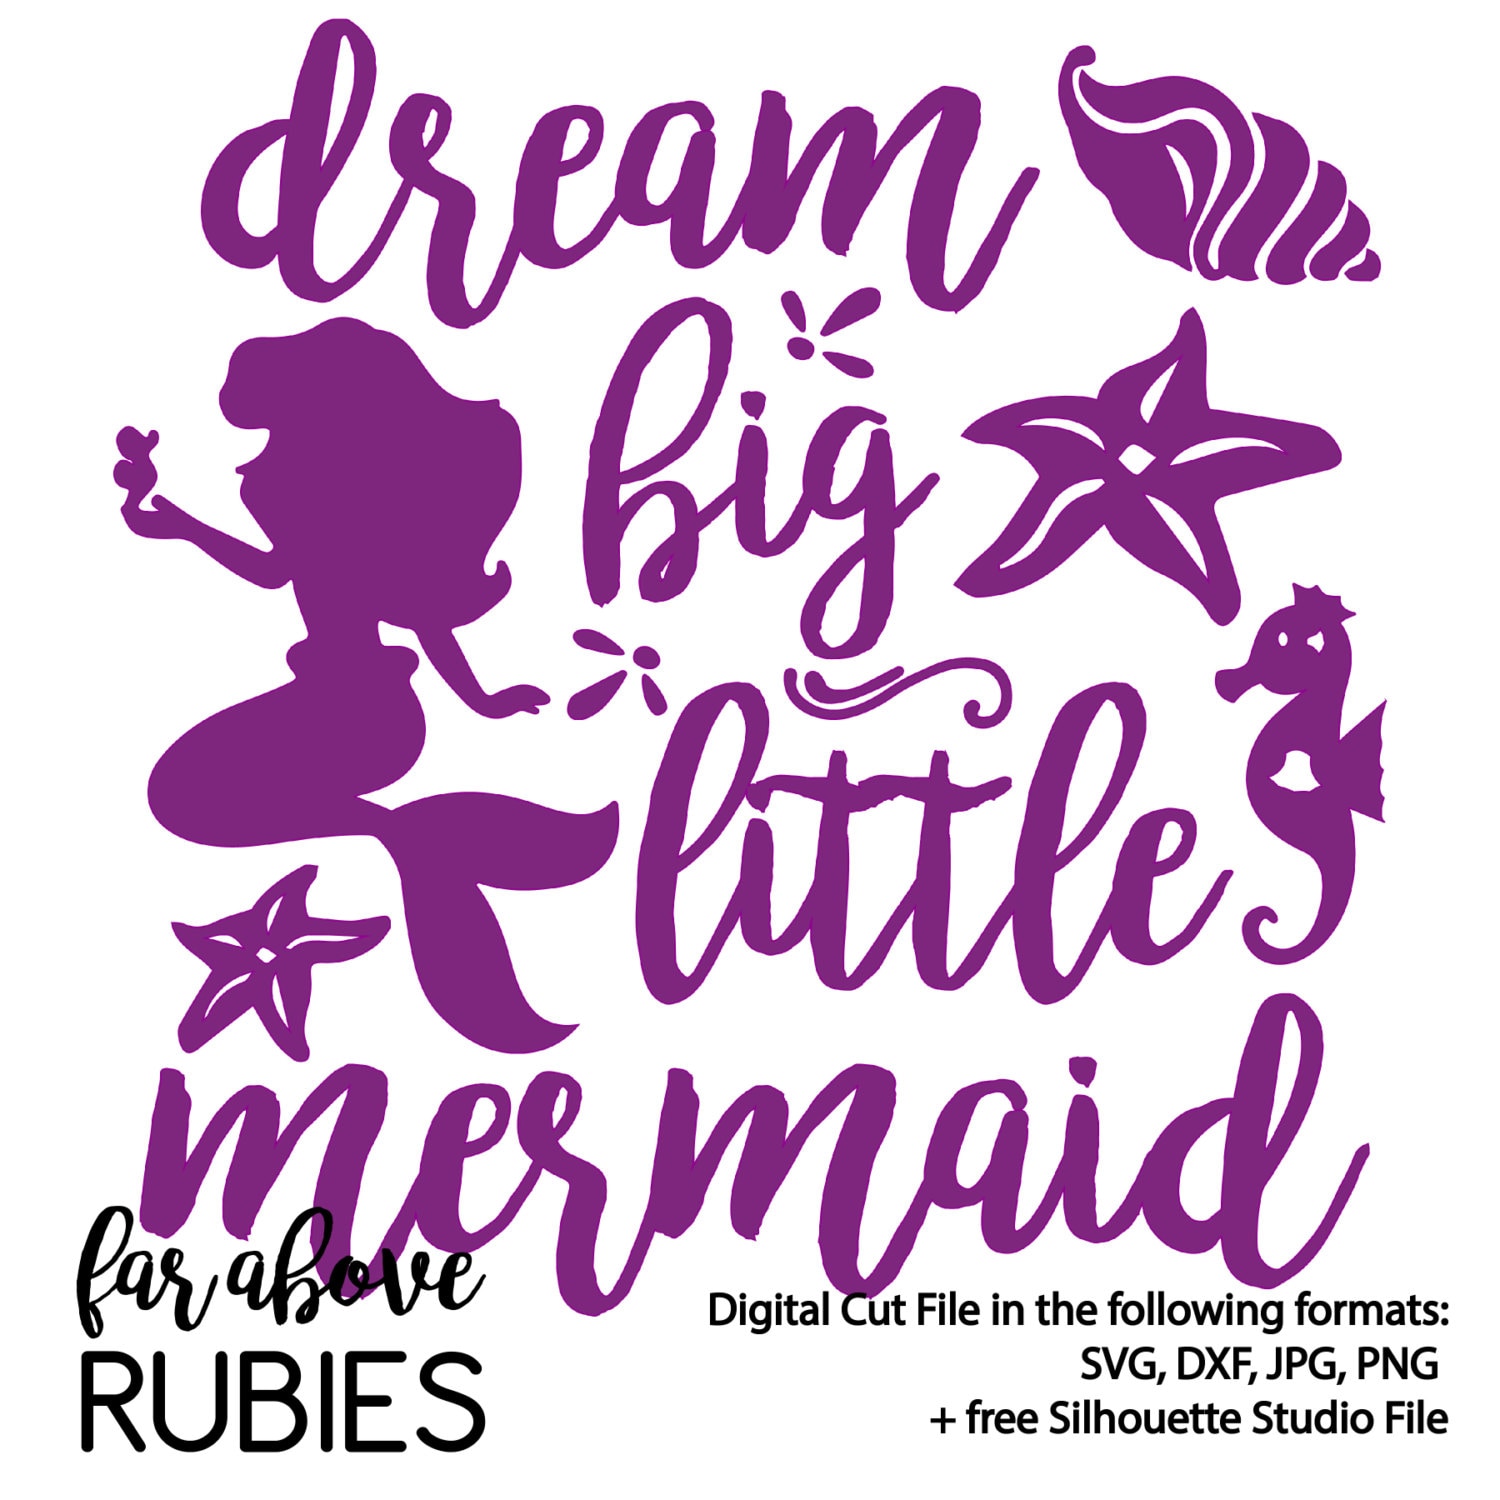 Free Mermaid Silhouette Svg : Mermaids Cuttable Frame - You can copy